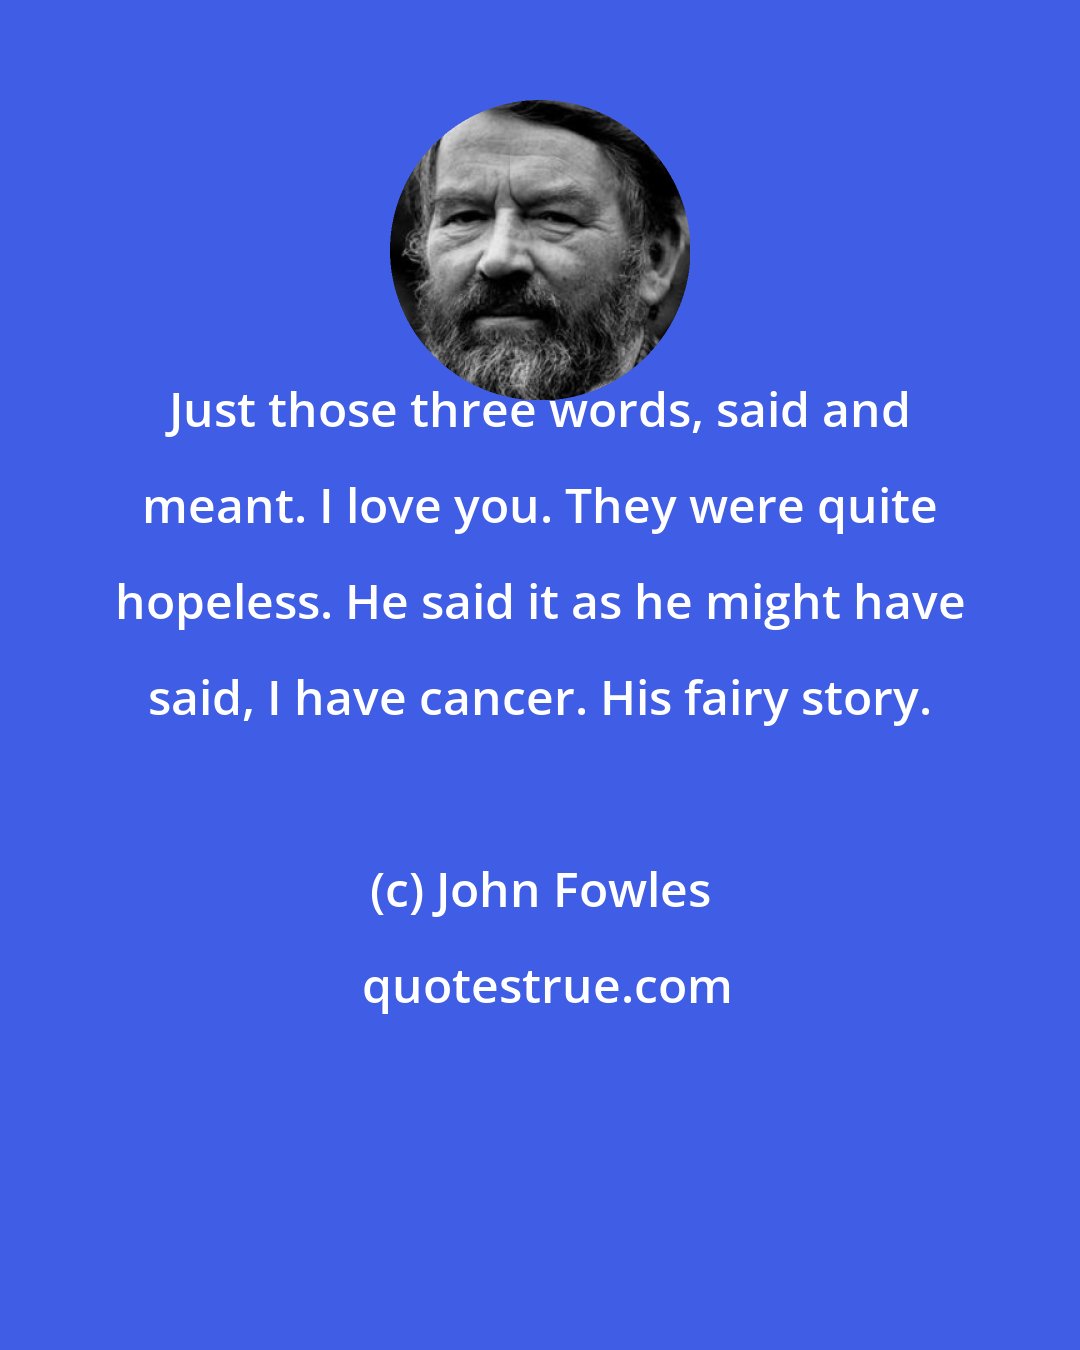 John Fowles: Just those three words, said and meant. I love you. They were quite hopeless. He said it as he might have said, I have cancer. His fairy story.